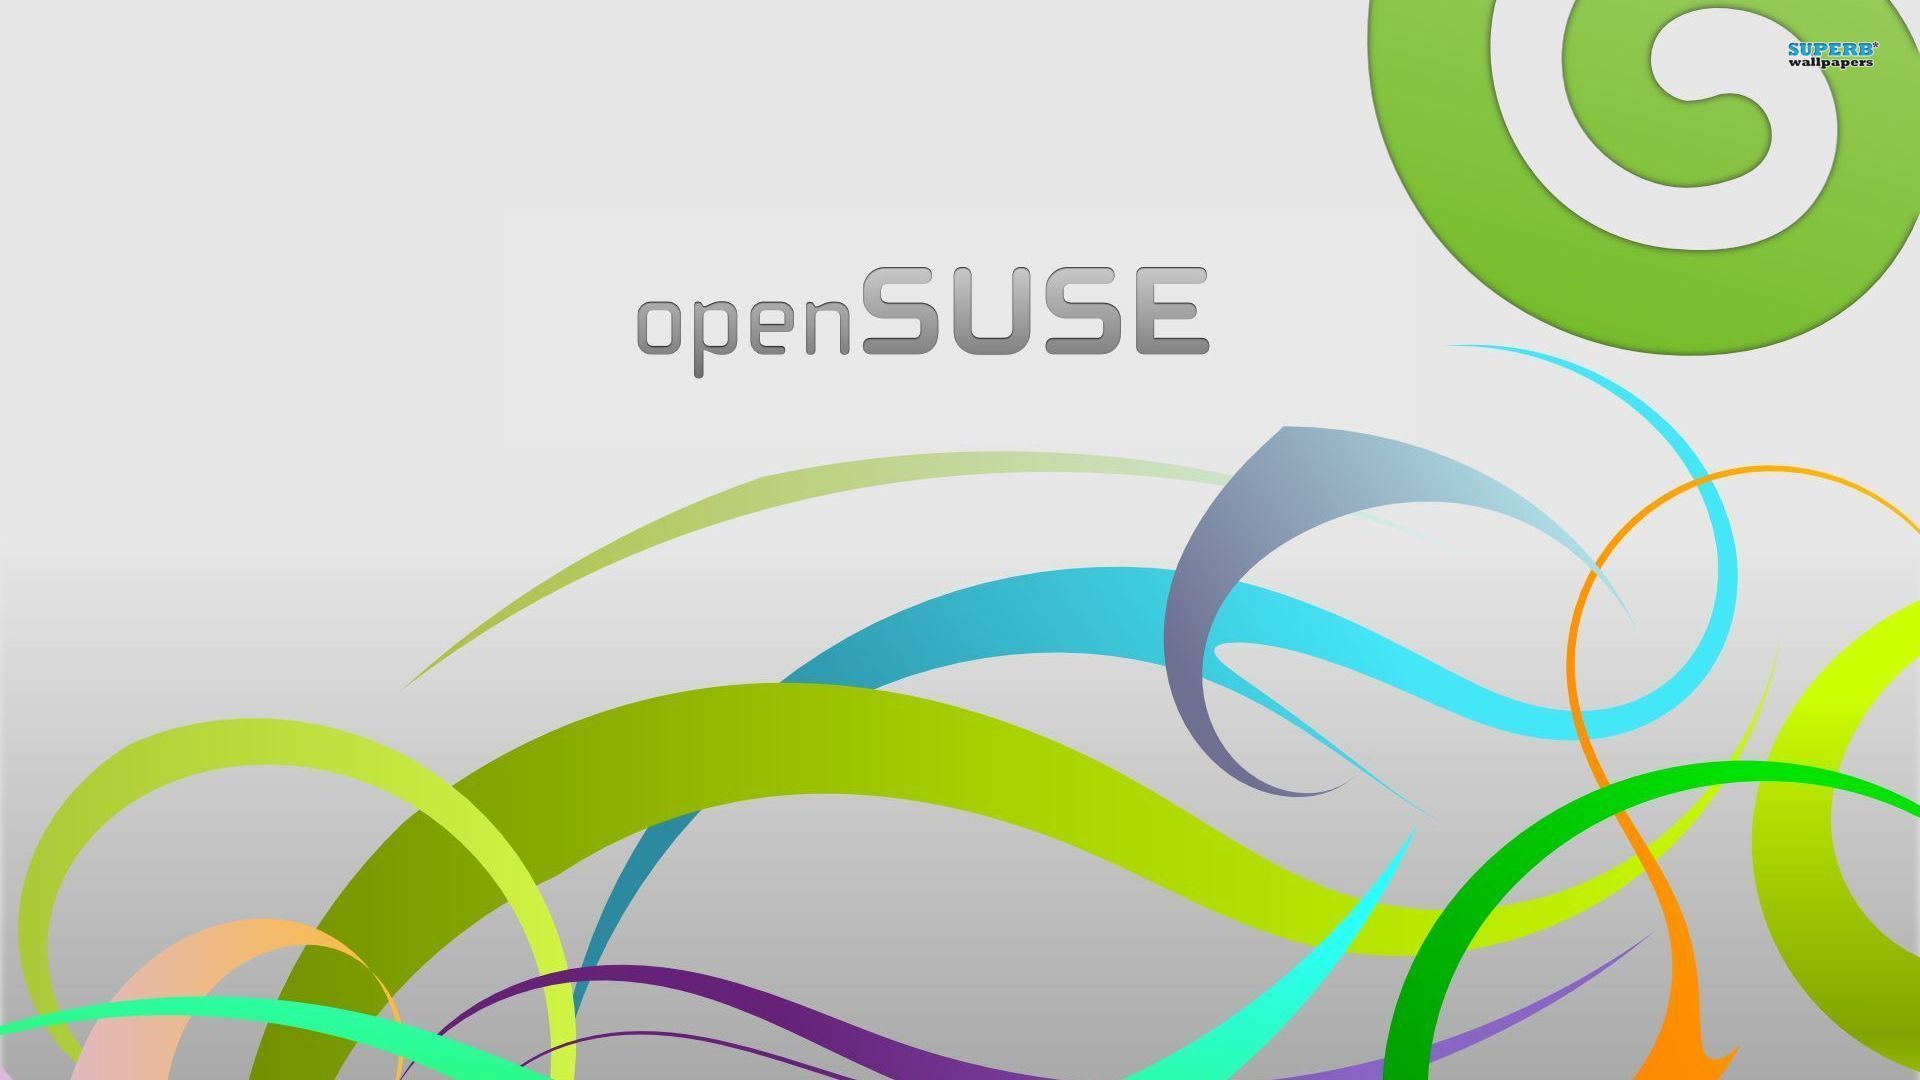 openSUSE wallpaper - Computer wallpapers - #10792